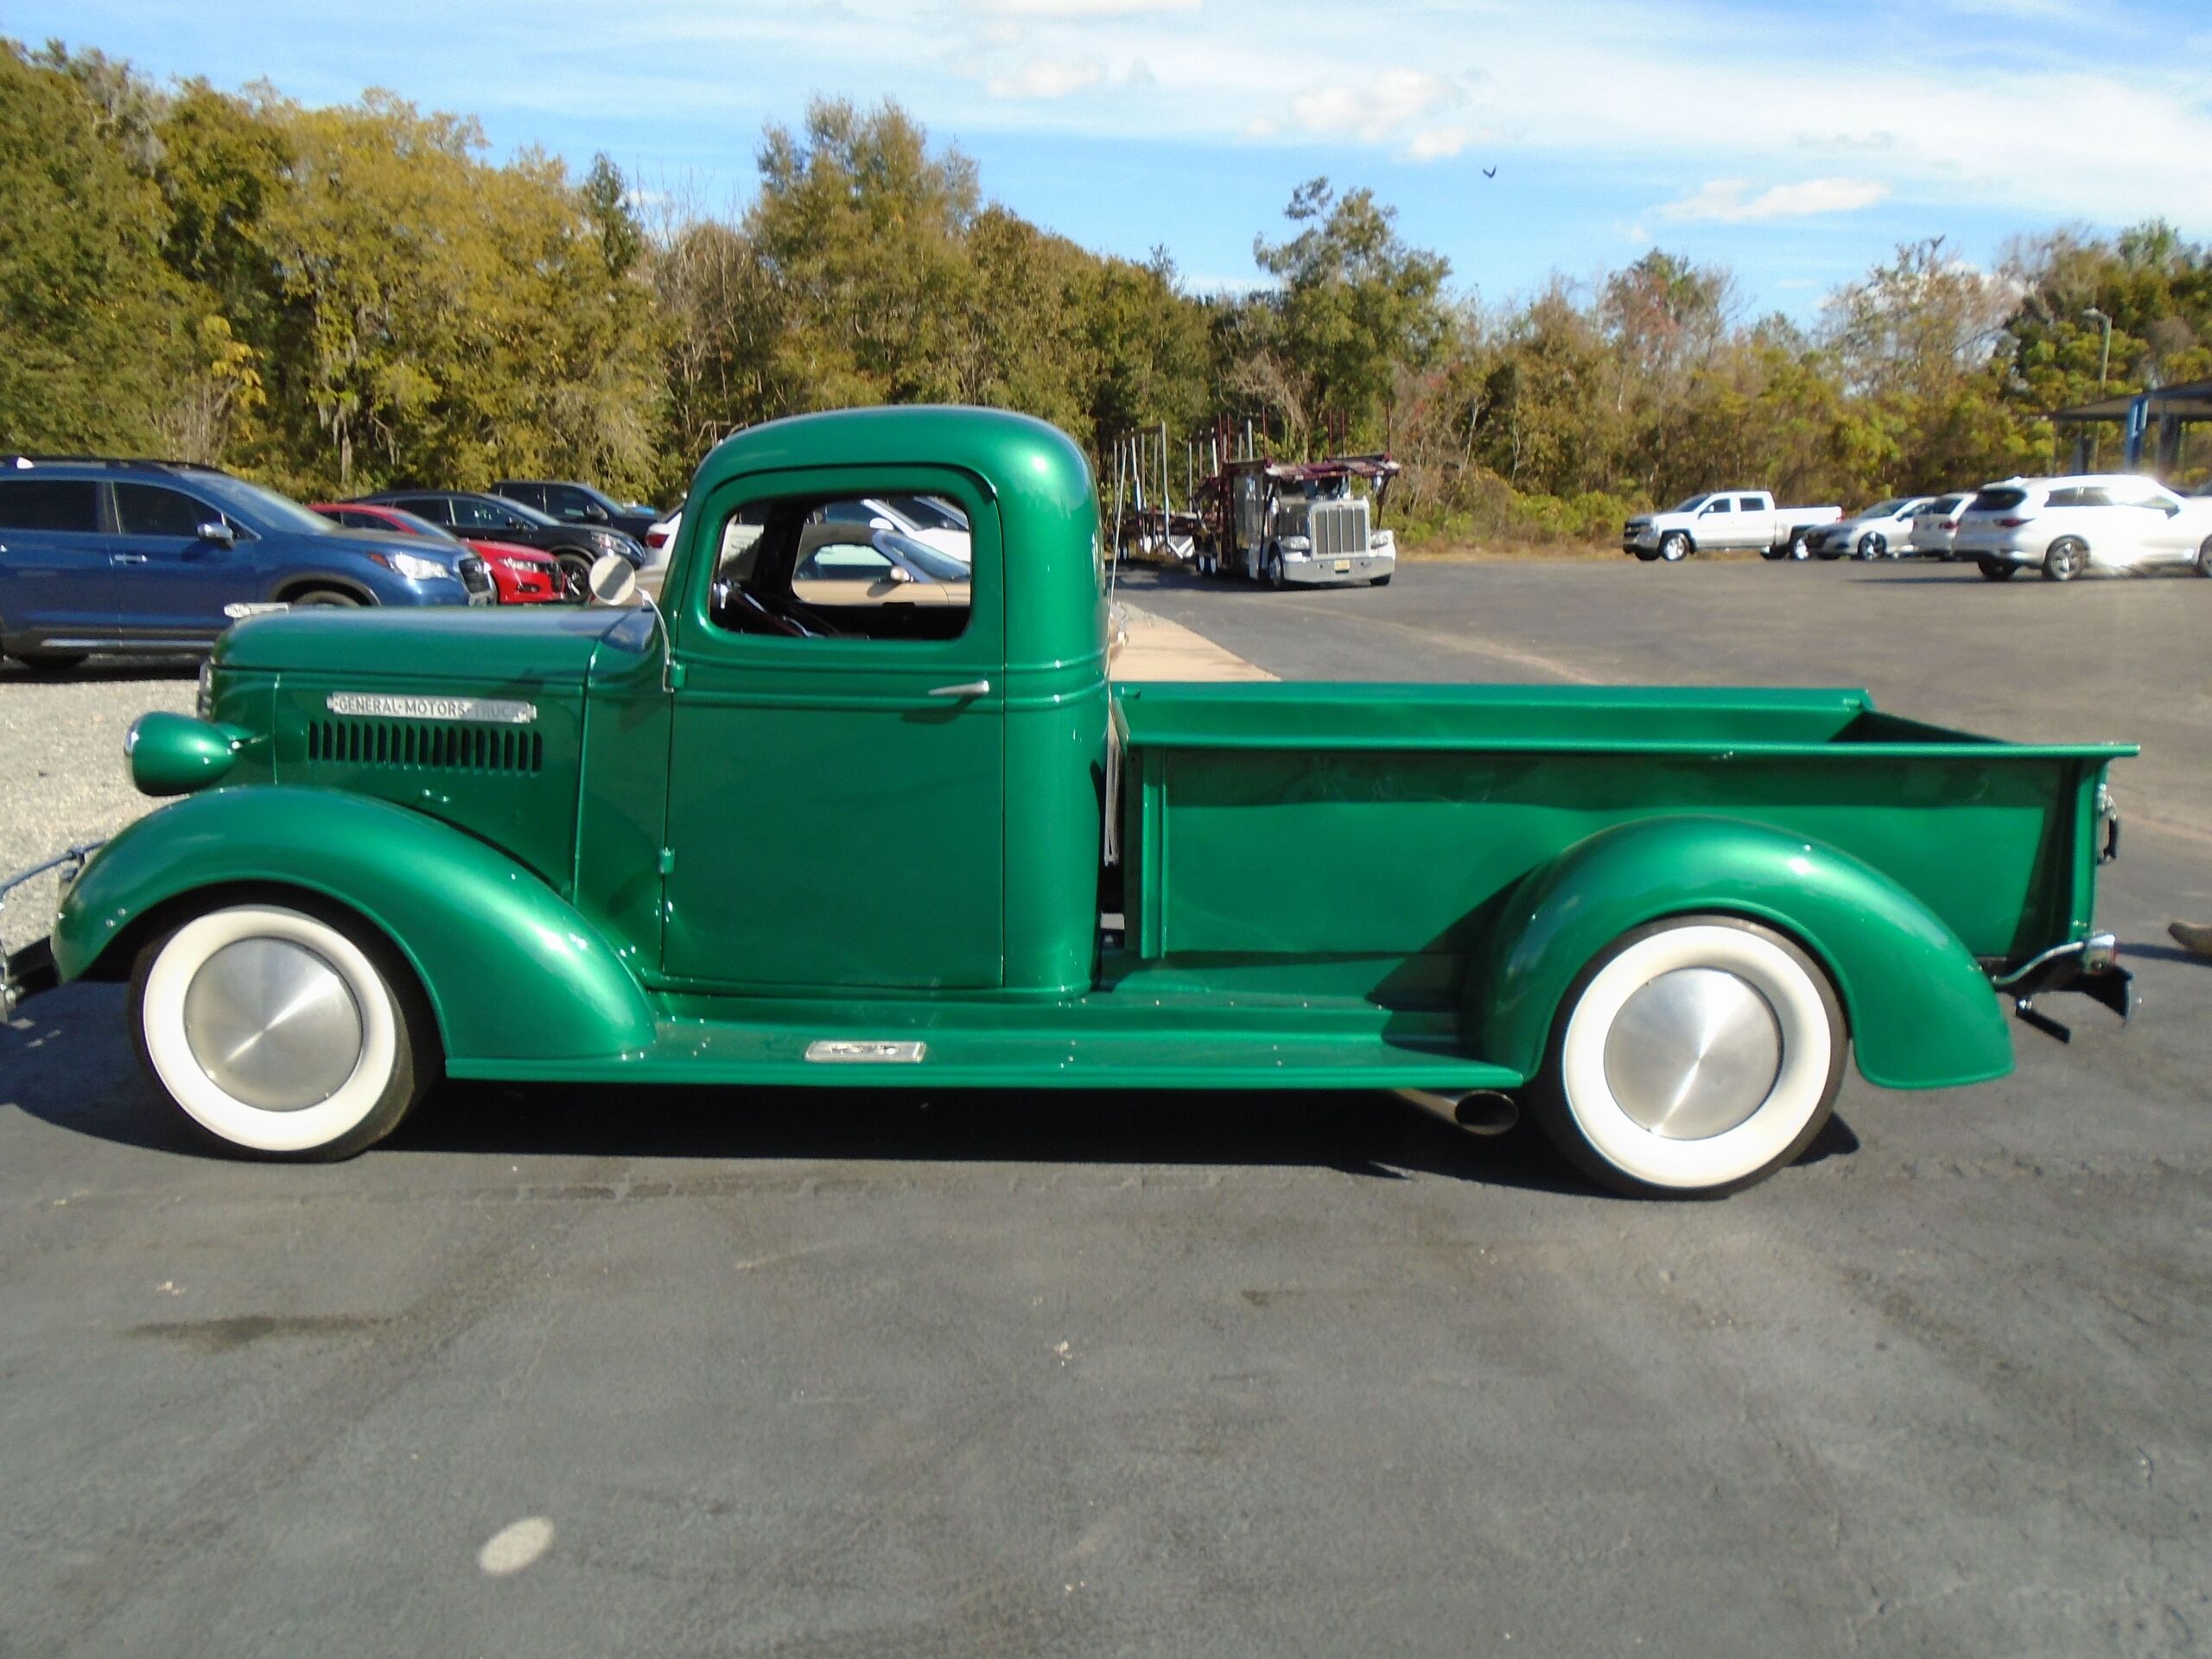 1937 GMC  Long bed  (Longbeds are rare) 8